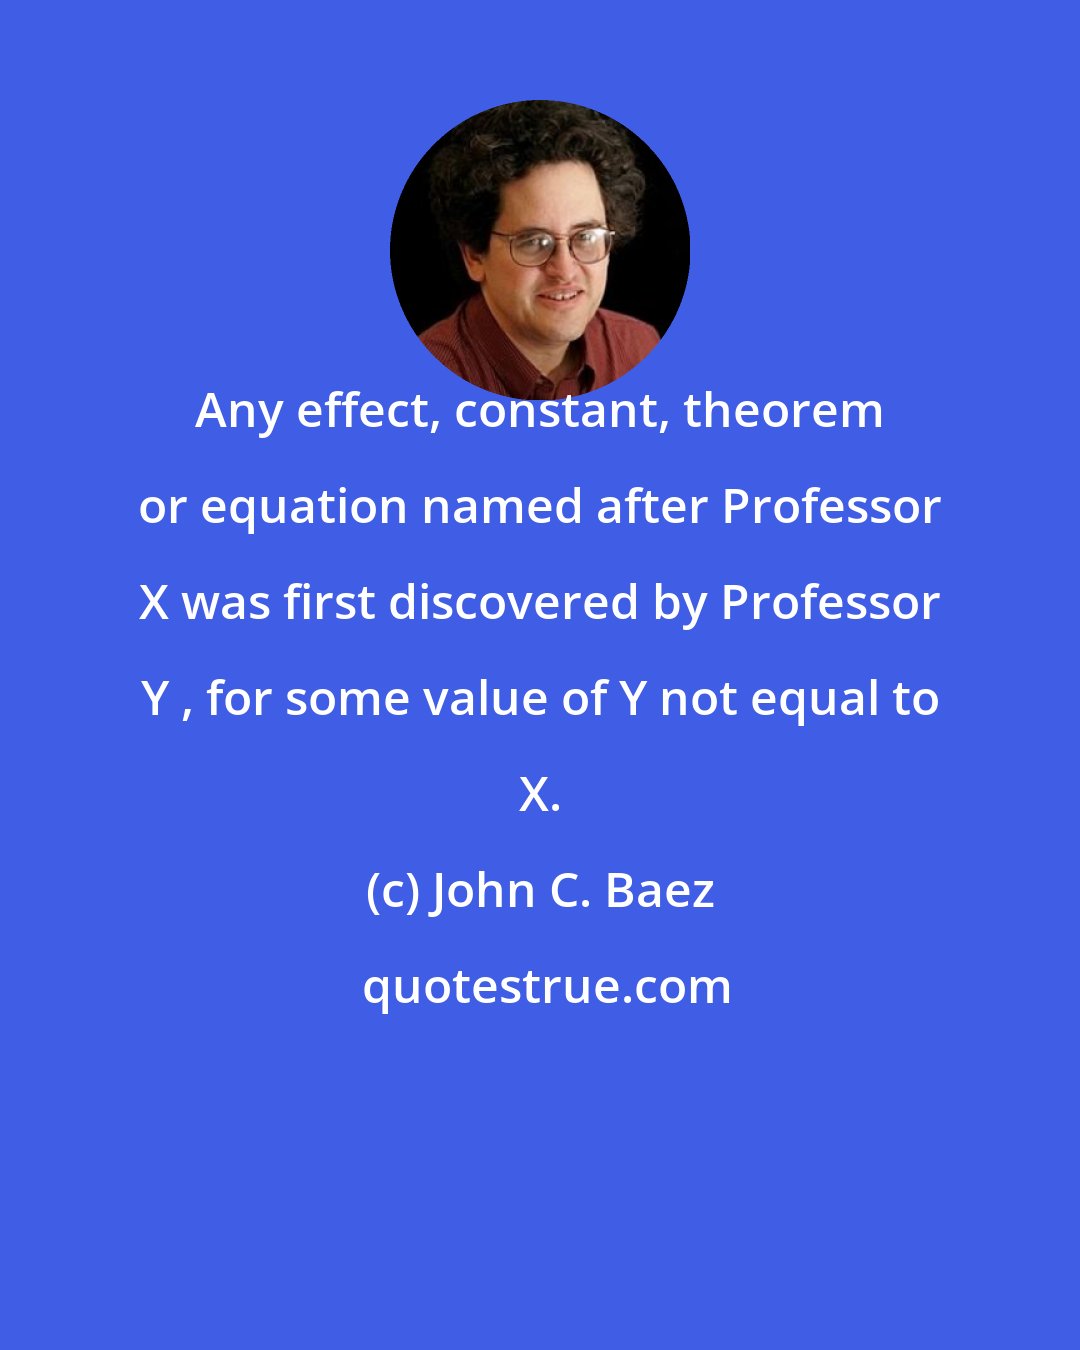 John C. Baez: Any effect, constant, theorem or equation named after Professor X was first discovered by Professor Y , for some value of Y not equal to X.